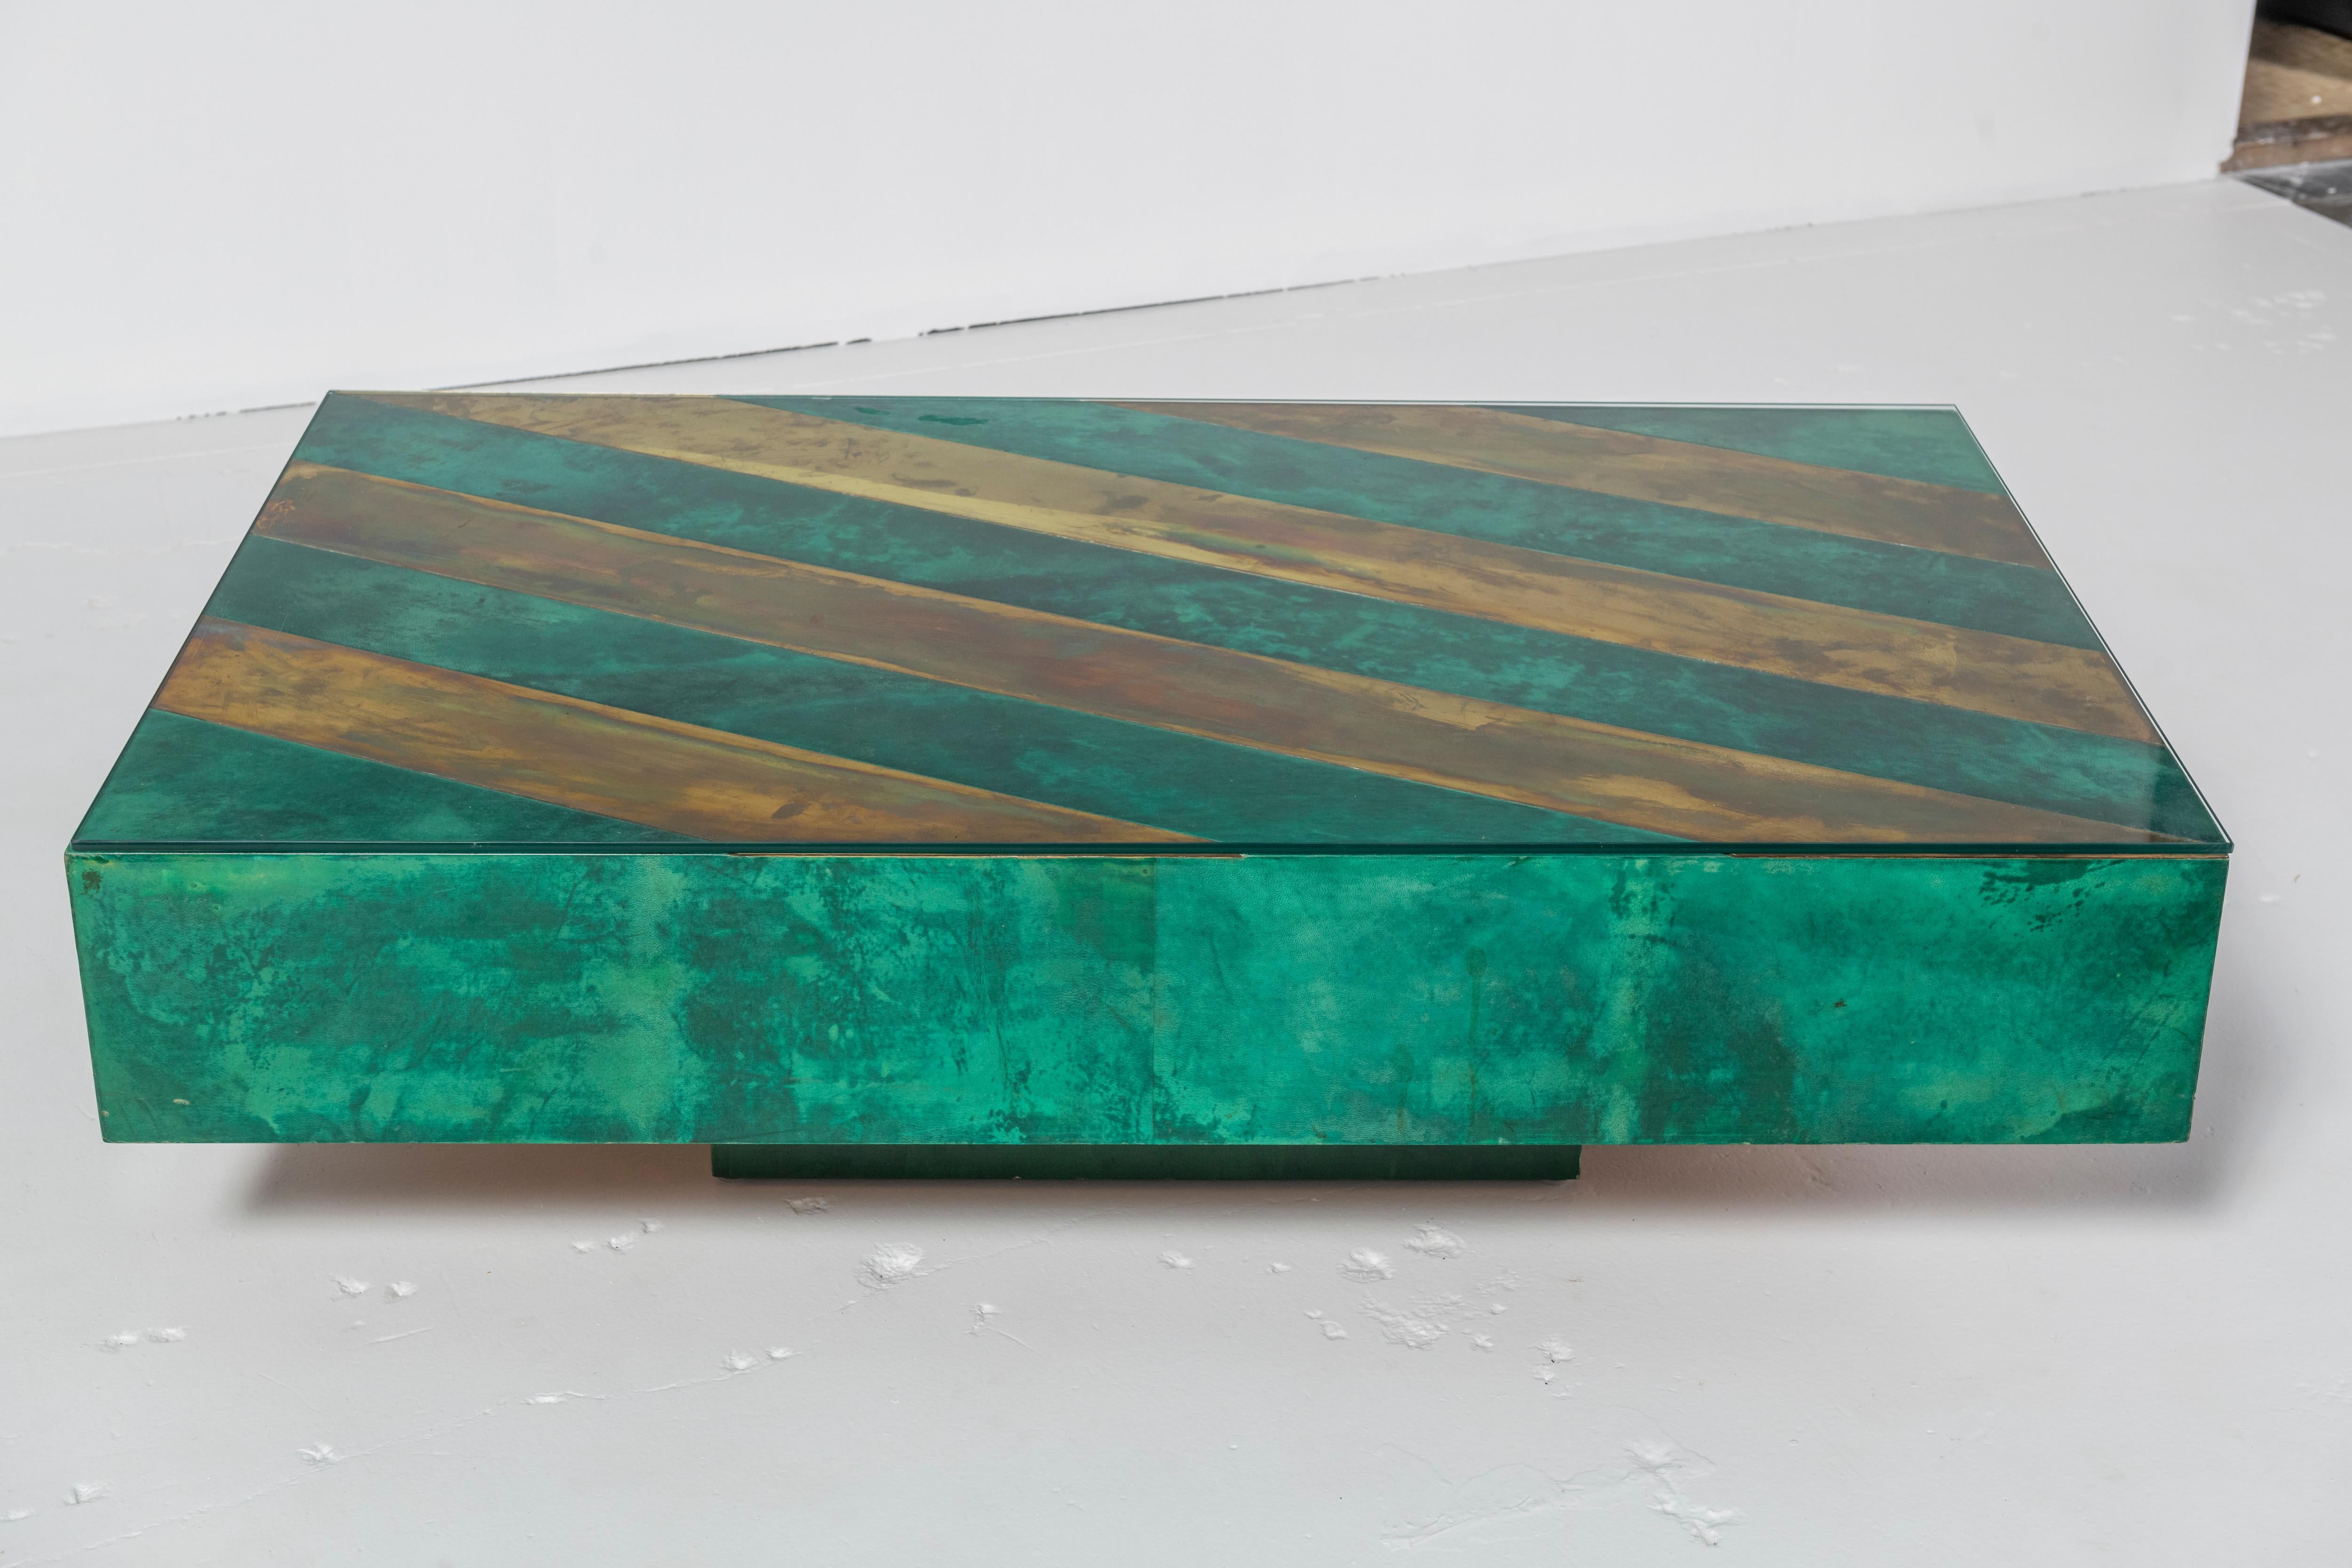 Italian Aldo Tura Coffee Table in Emerald Green Parchment with Brass Inlay, 1979 For Sale